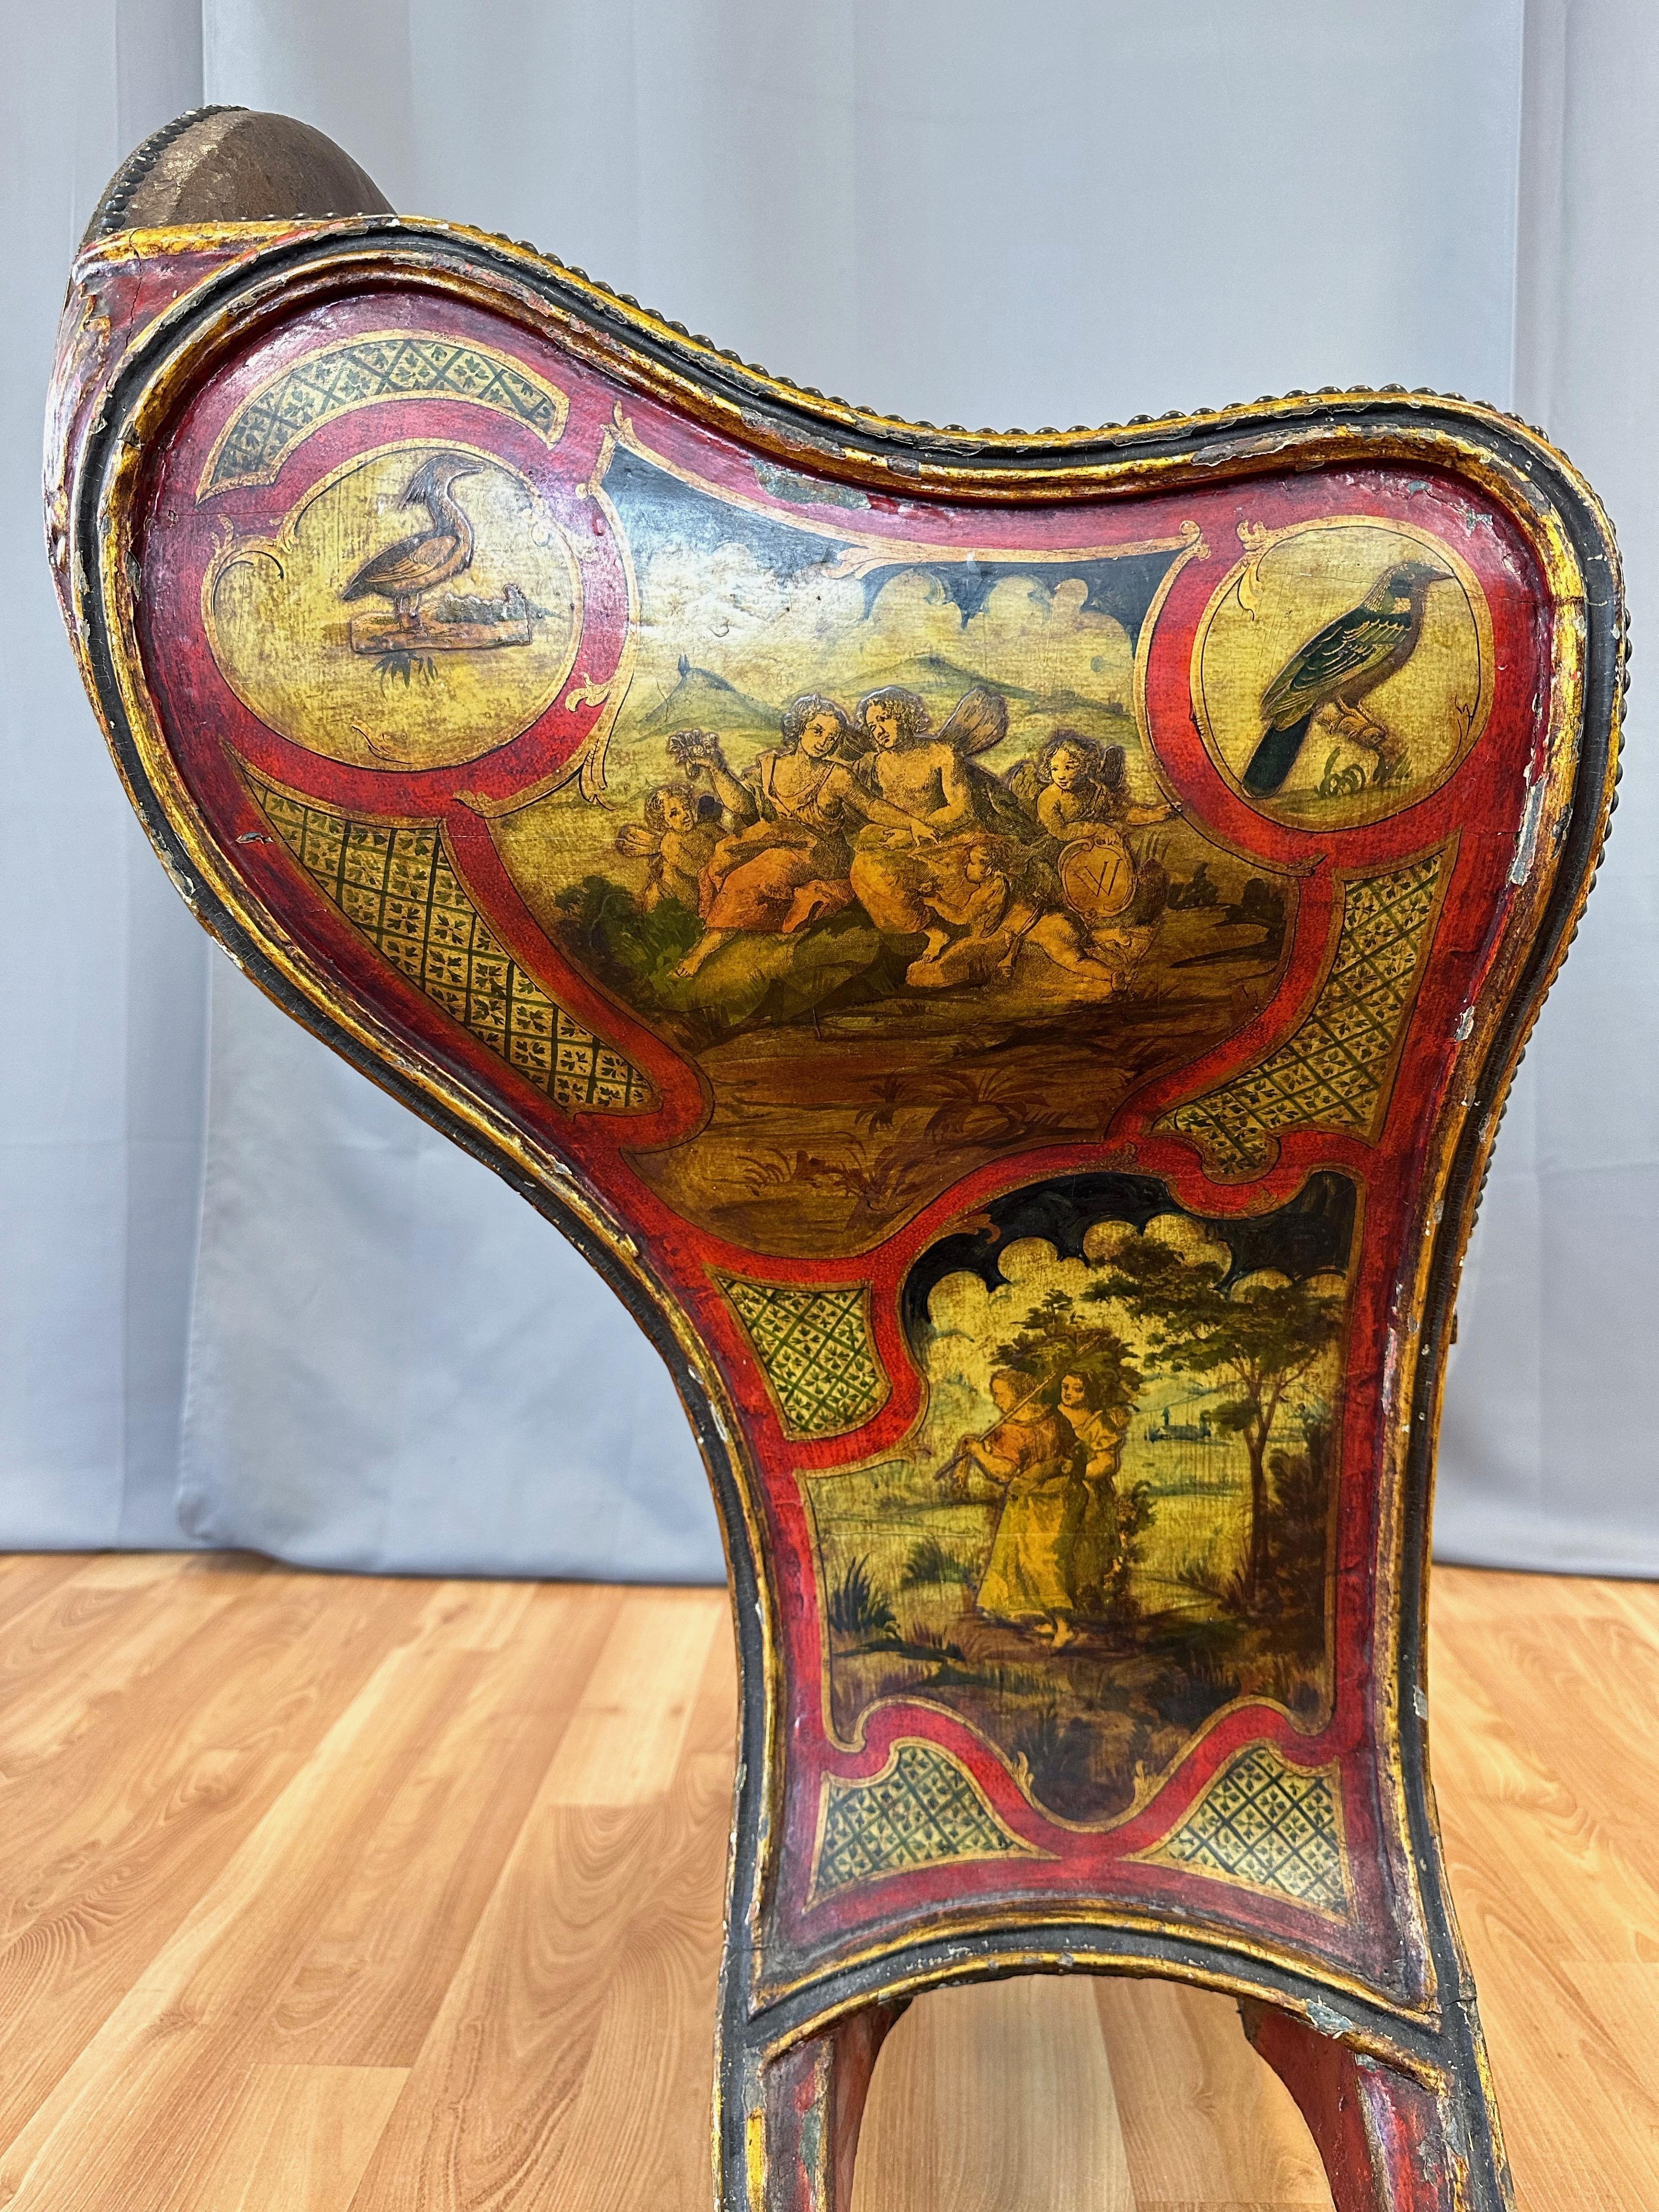 Venetian Illustrated, Polychrome, Gilt, and Leather Gondola Chair, c. 1820 For Sale 8